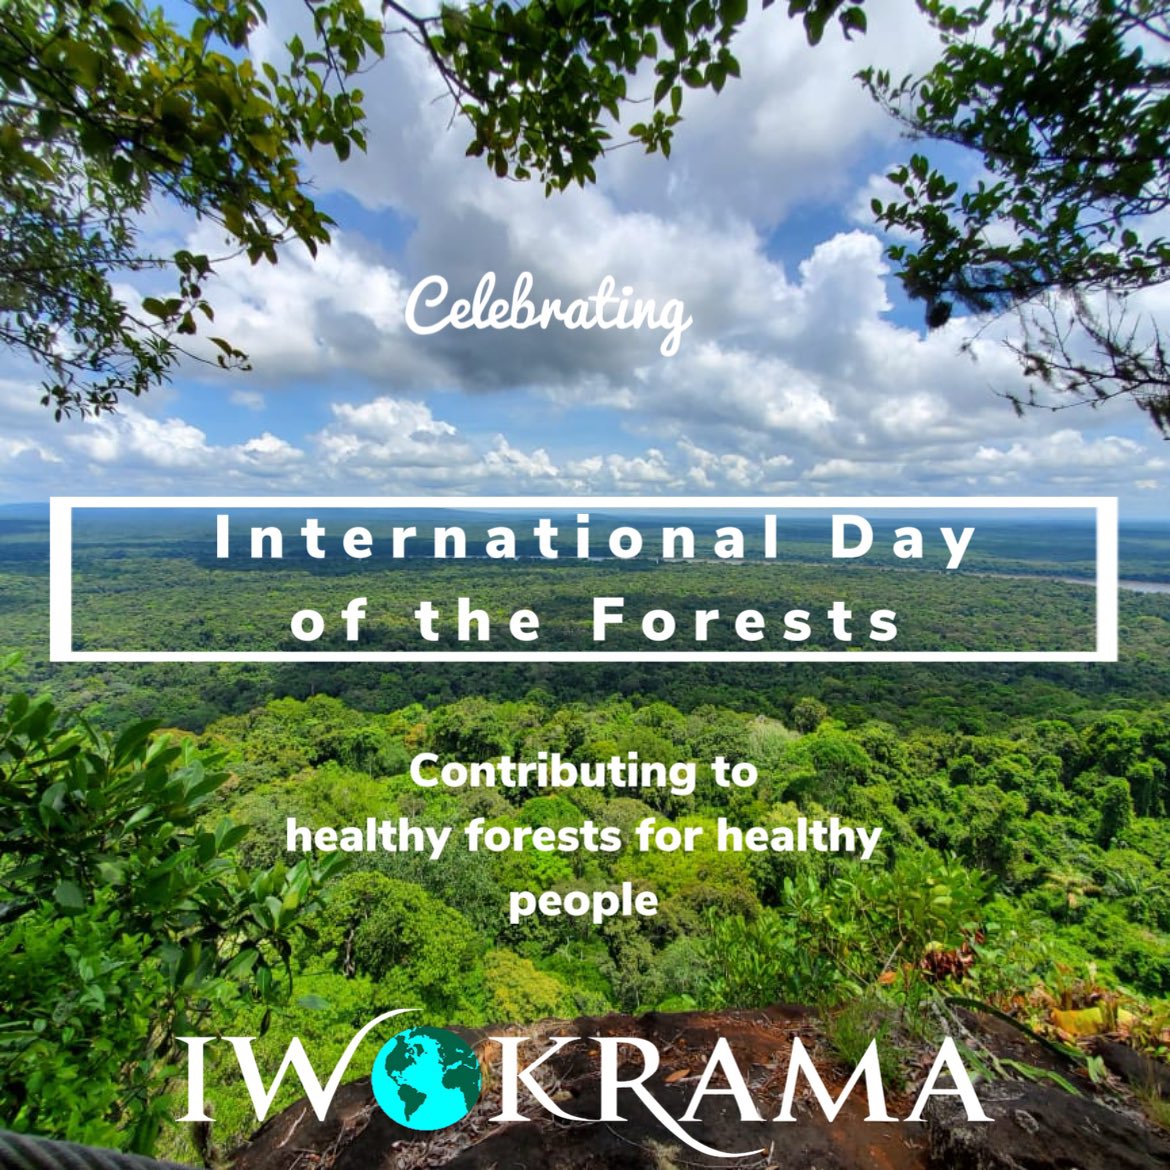 Helping to take care of our forest 🌳 💚 🇬🇾 #iwokrama